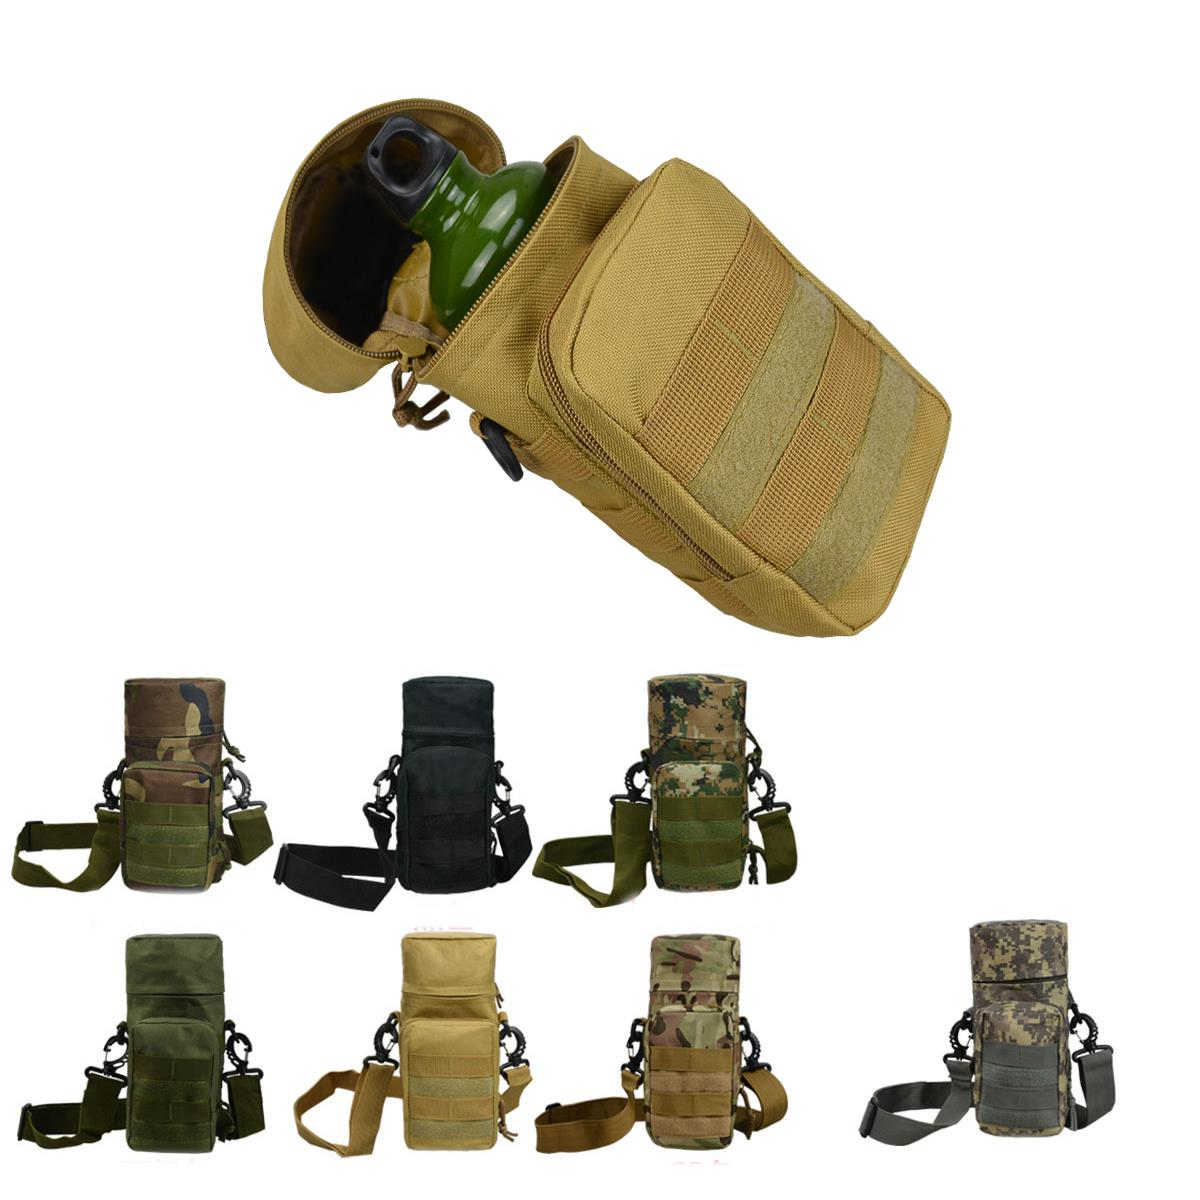 BL051 5.2L Water Bottle Bag Waterproof Oxford Fabric Bag Military Tactical Molle Waist Bag Utility Pouch Emergency Pocke